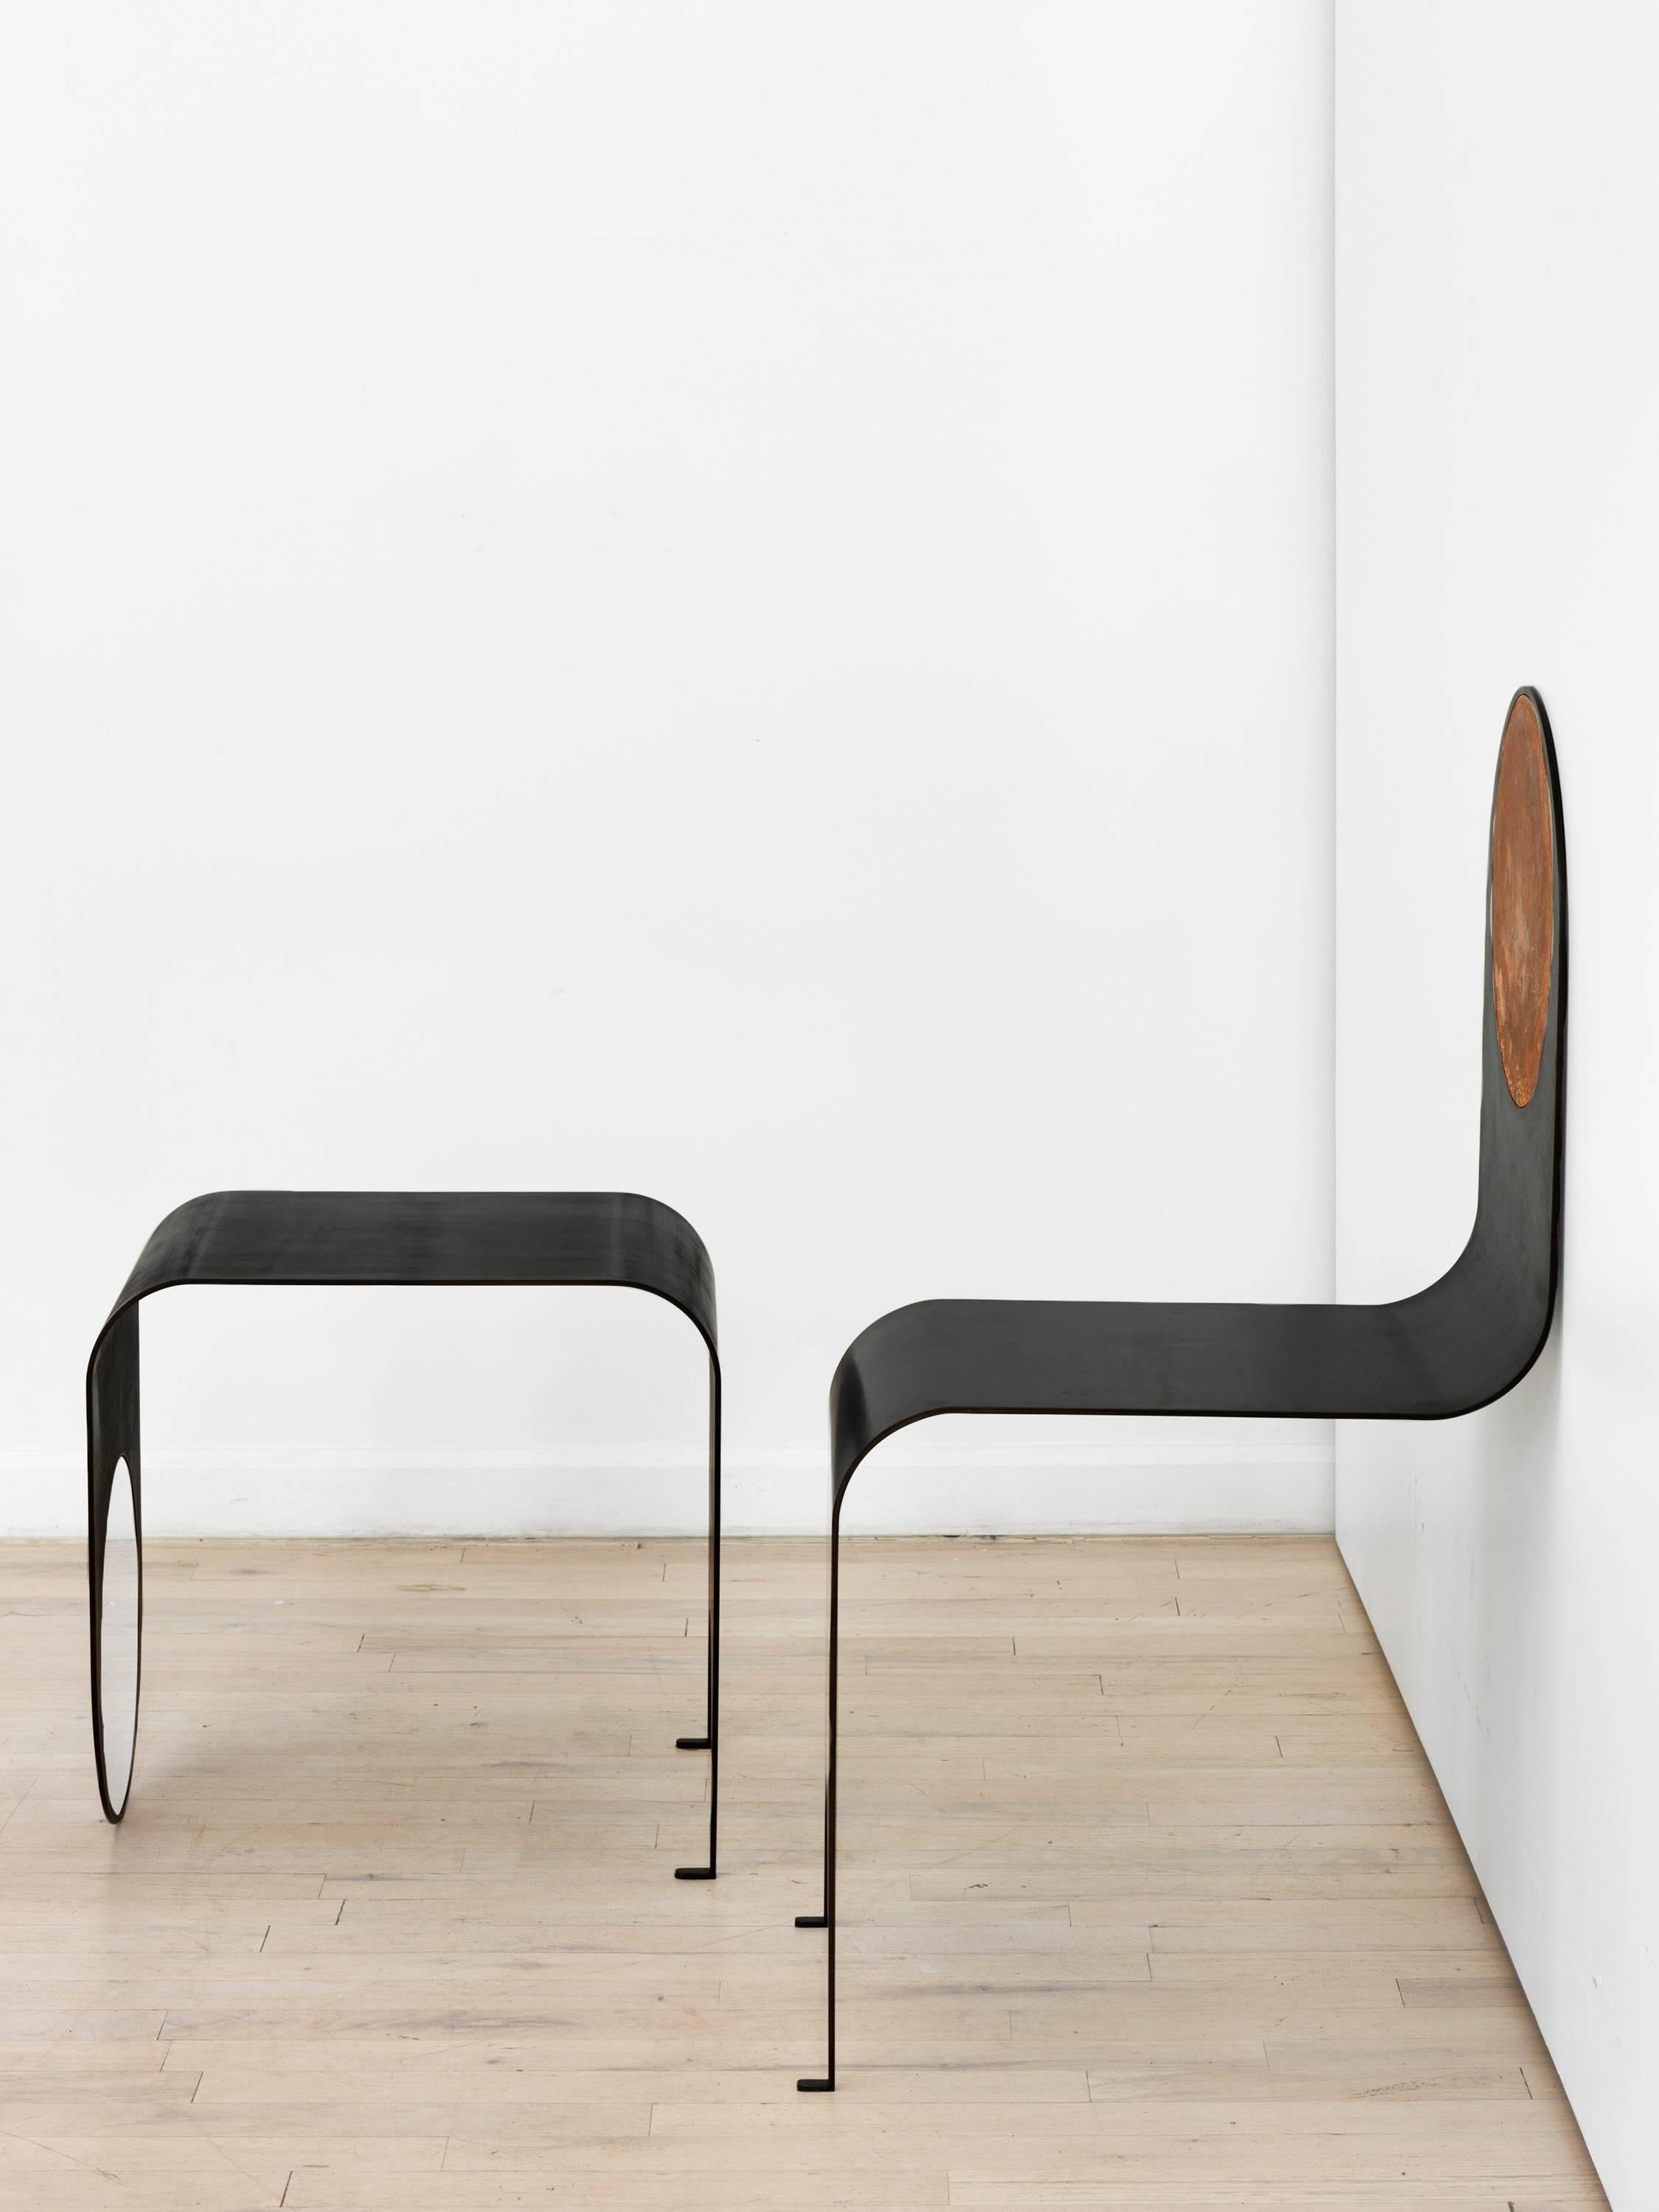 The juxtaposition between the playful, anthropomorphic design of the thin chair and its subtle form and detailing, results in a piece that is equal parts whimsical and sophisticated.